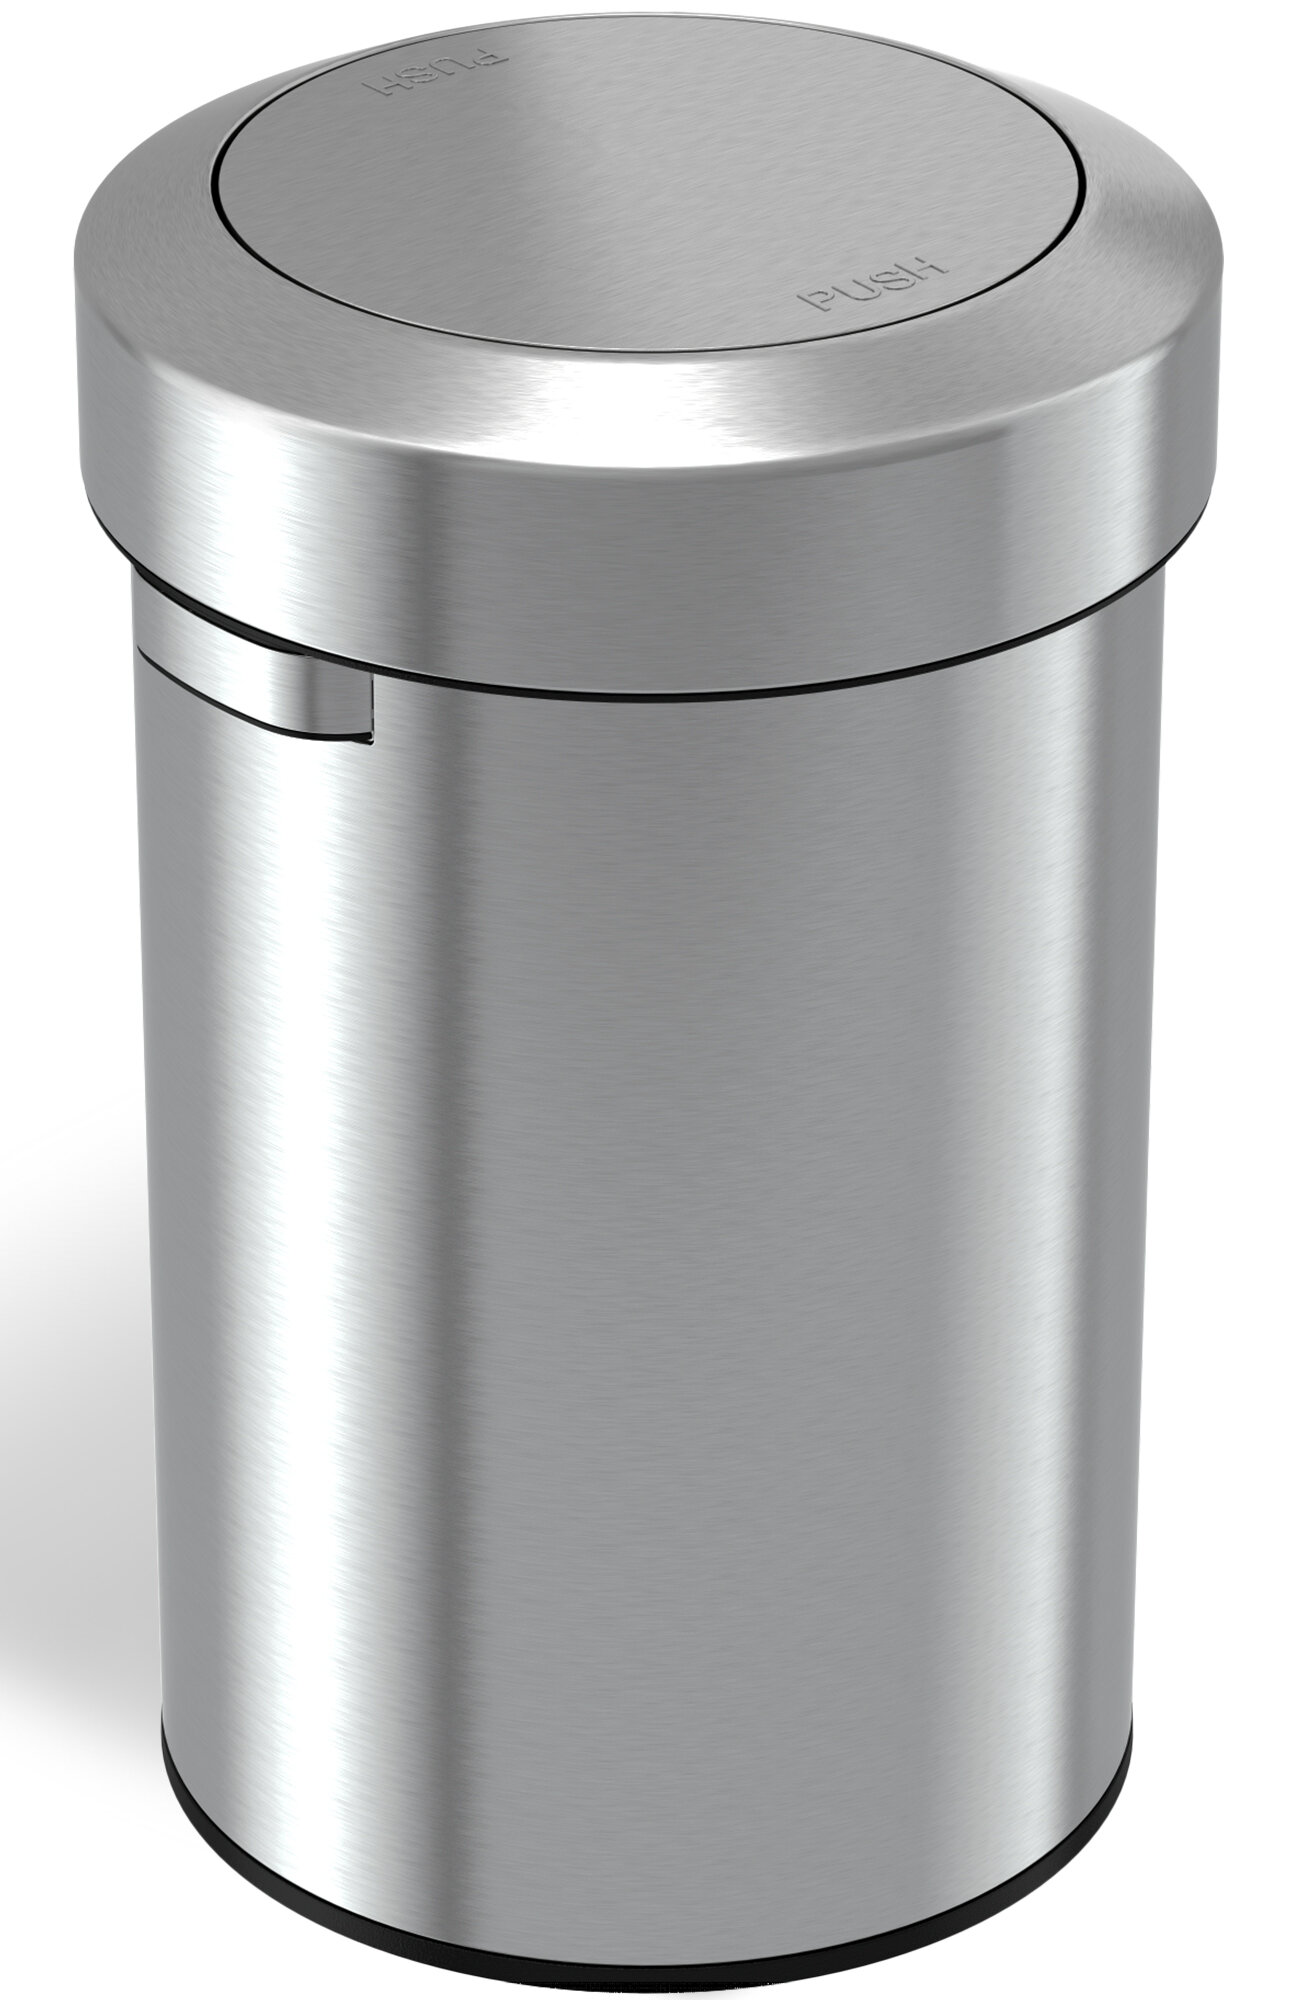 Kitchen And Bathroom Garbage Bin light grey Trash Can With Swing-top Lid Slim Trash Can For Home 